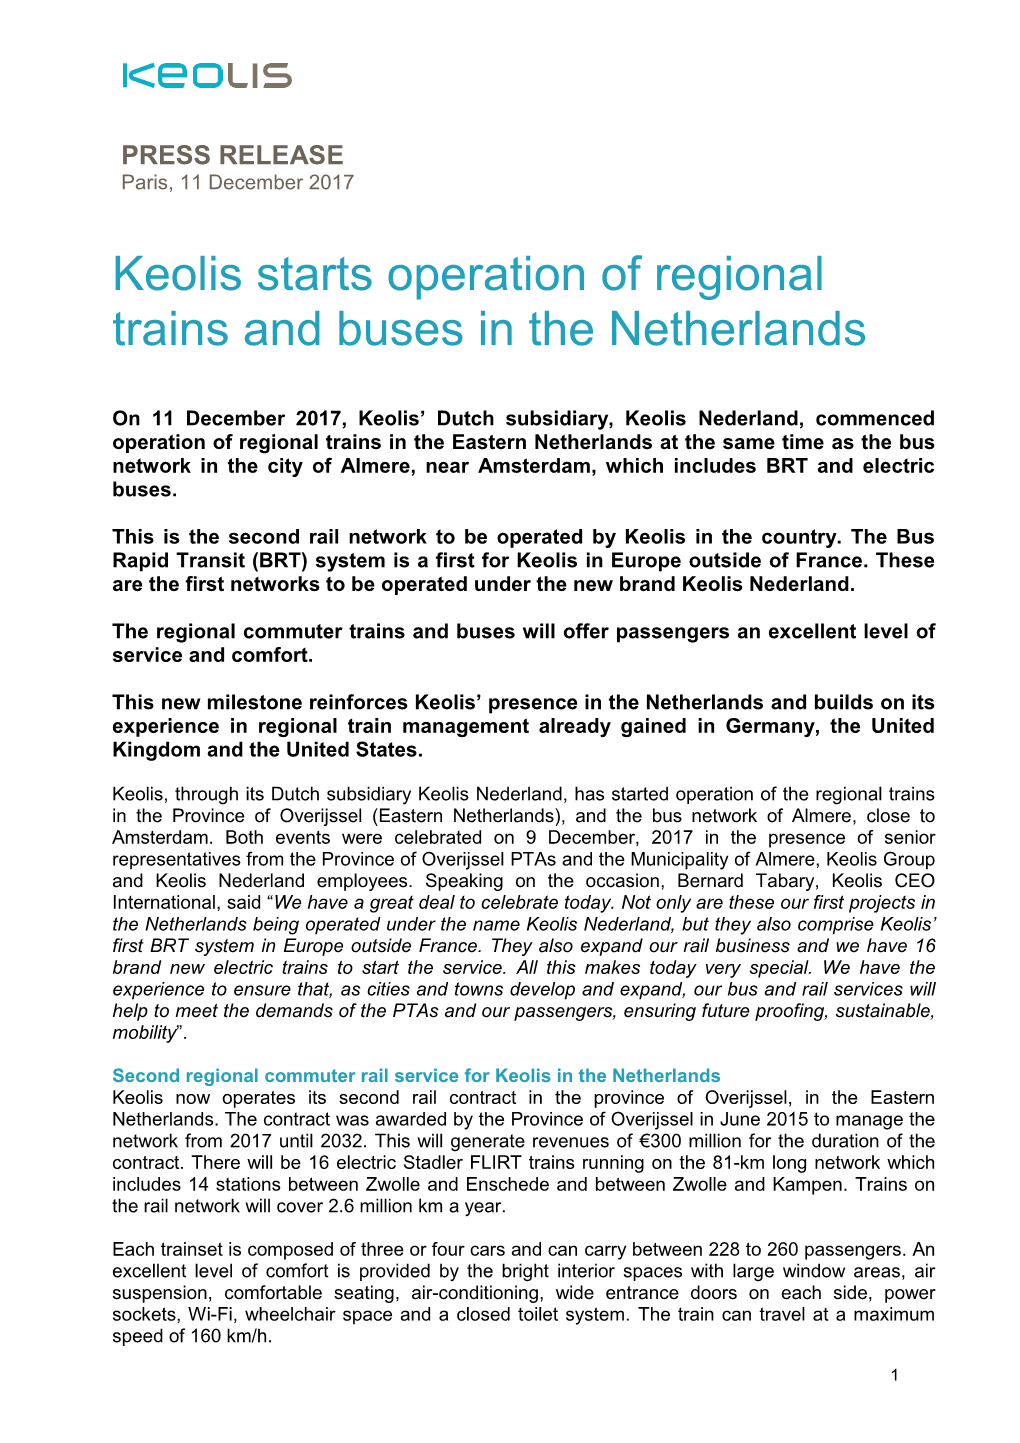 Keolis Starts Operation of Regional Trains and Buses in the Netherlands